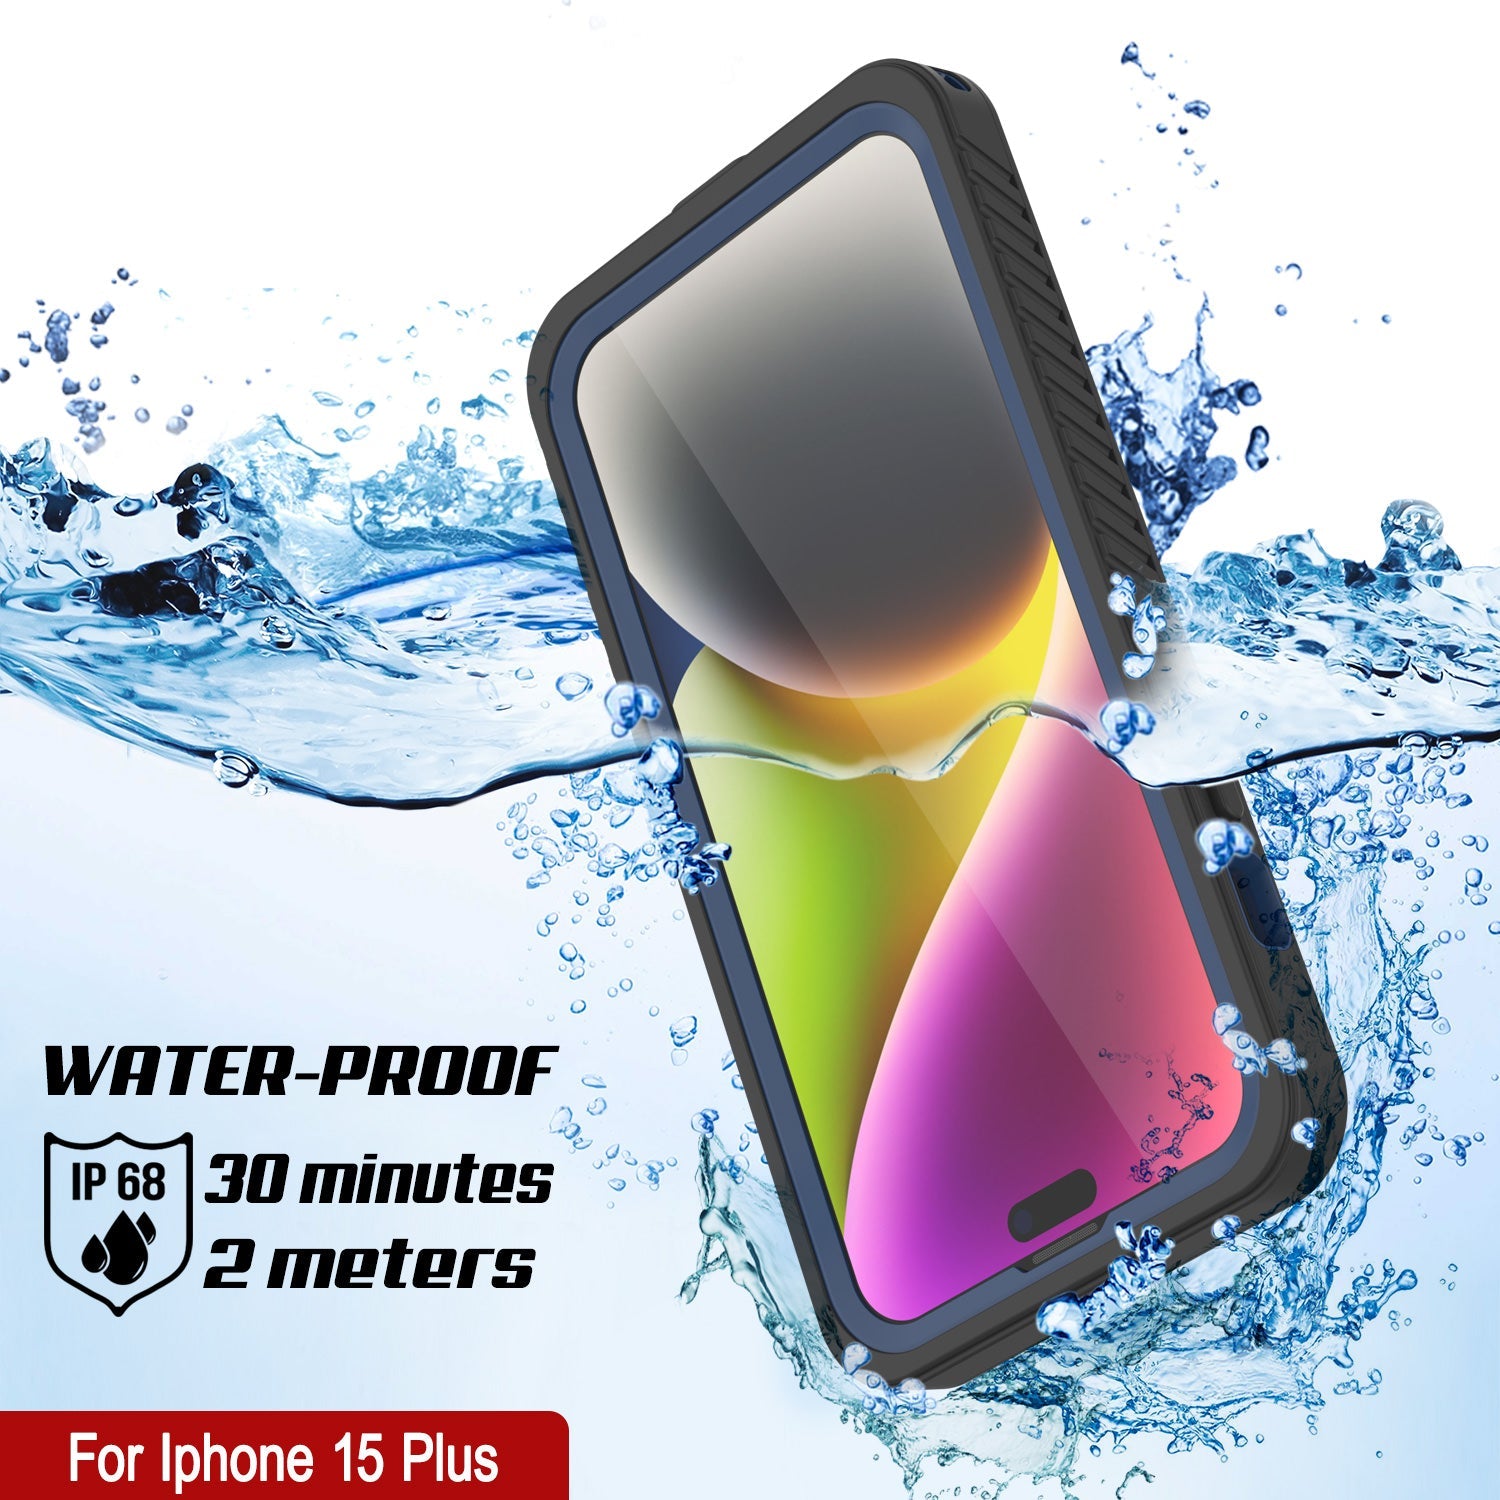 iPhone 15 Plus Waterproof Case, Punkcase [Extreme Series] Armor Cover W/ Built In Screen Protector [Navy Blue]